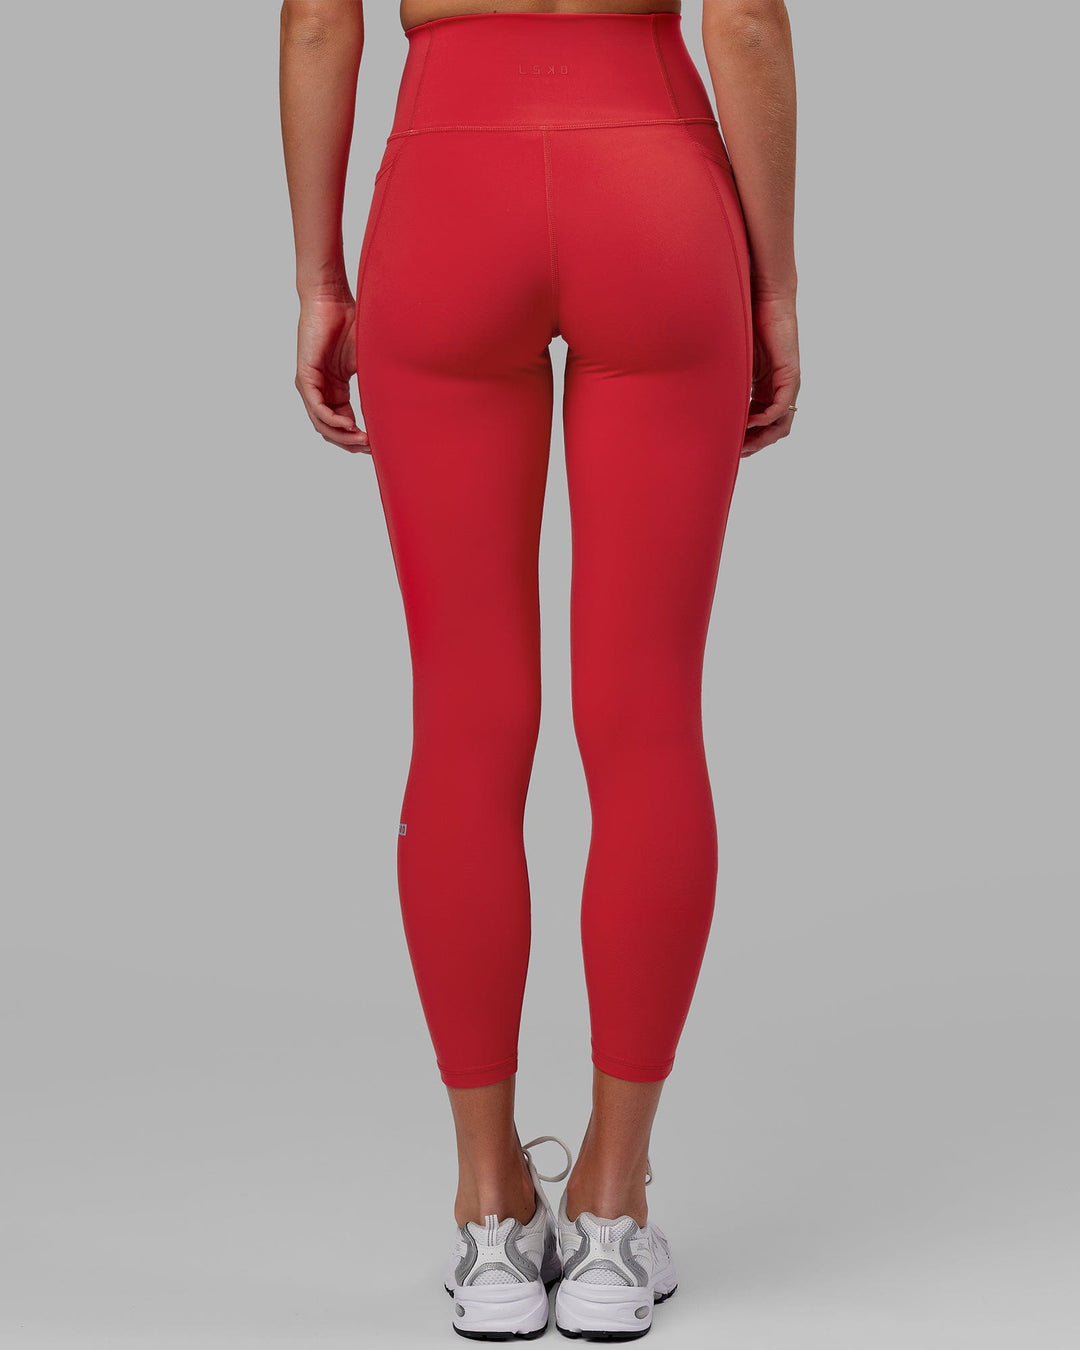 Fusion 7/8 Length Tights - Scarlet